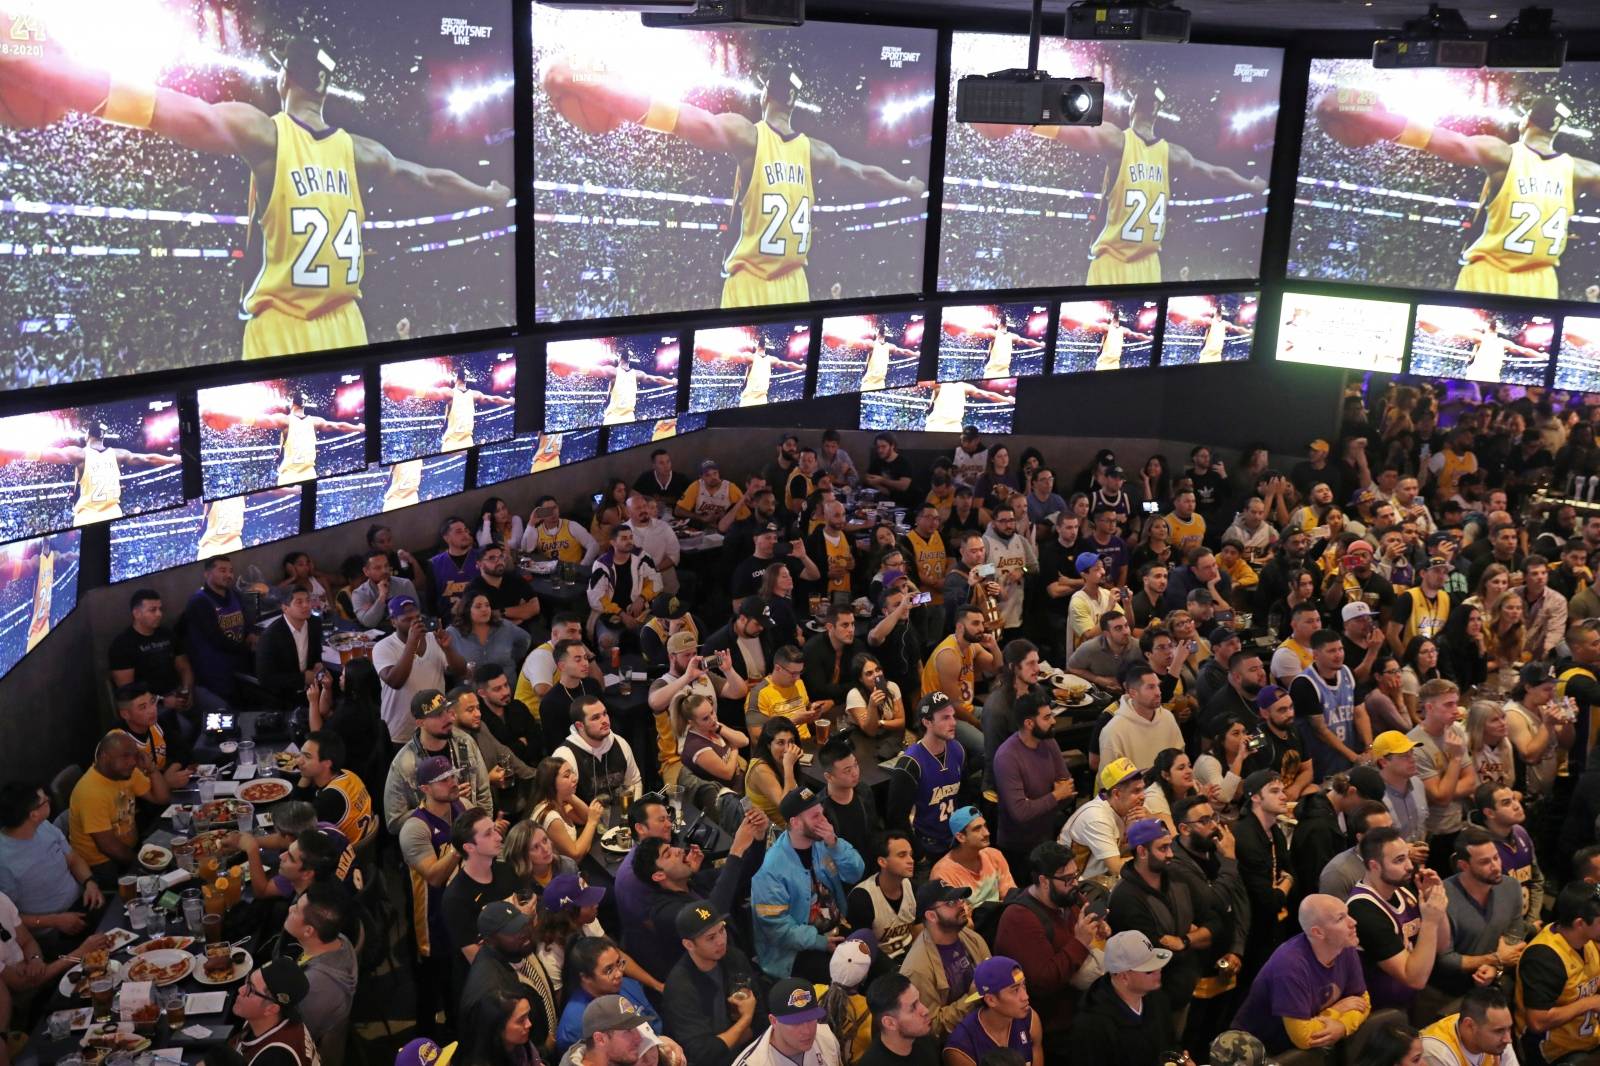 An image of Kobe Bryant appears on screens at Tom’s Watch Bar as fans watch a televised Los Angeles Lakers home game